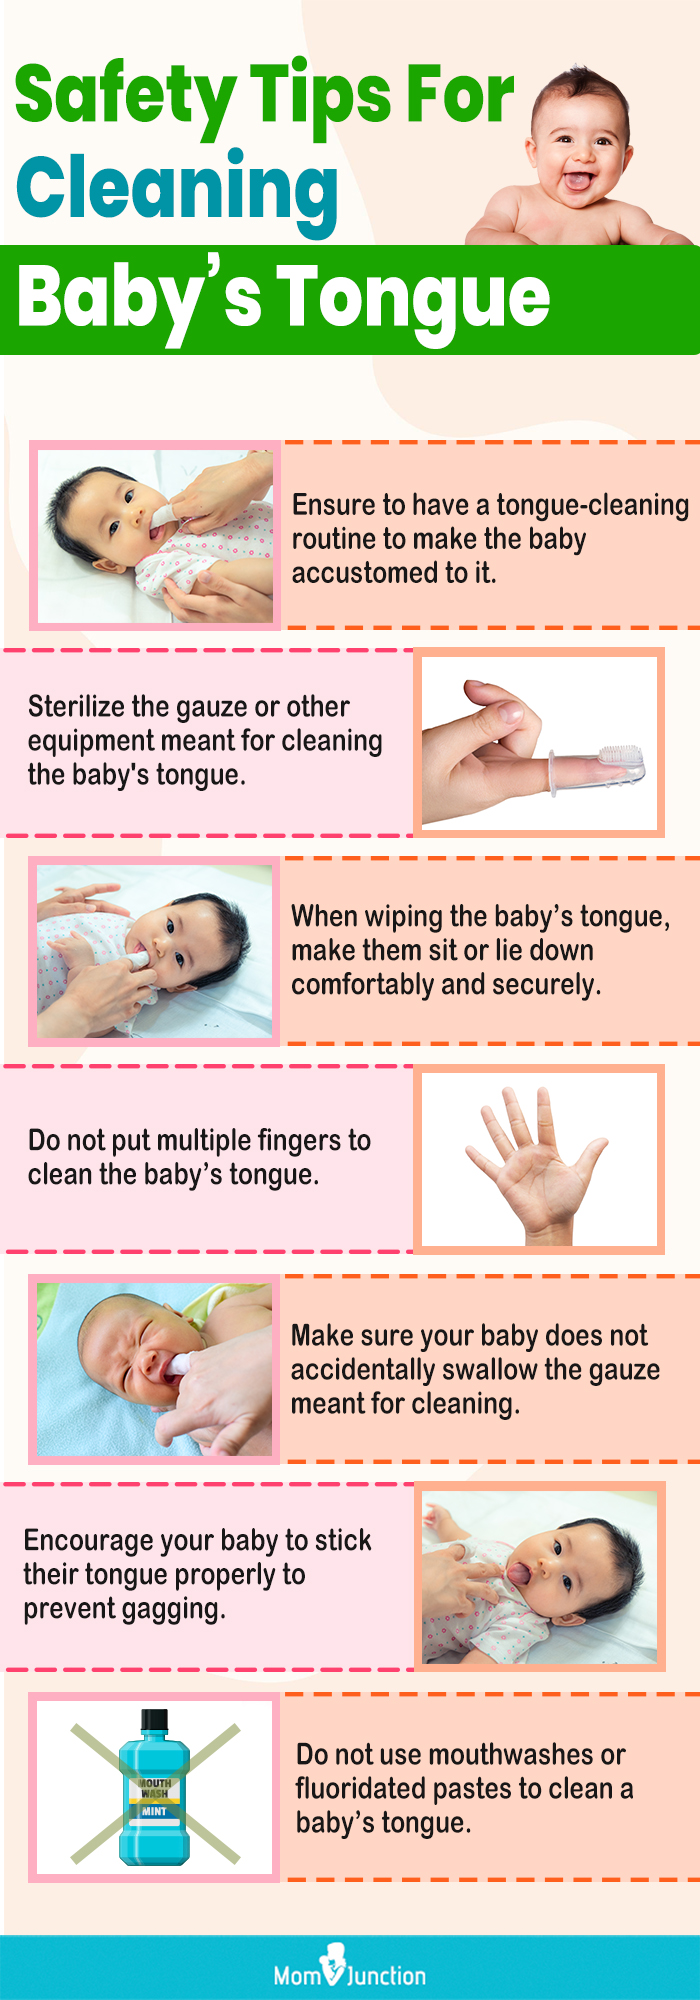 safety tips for cleaning baby’s tongue [infographic]